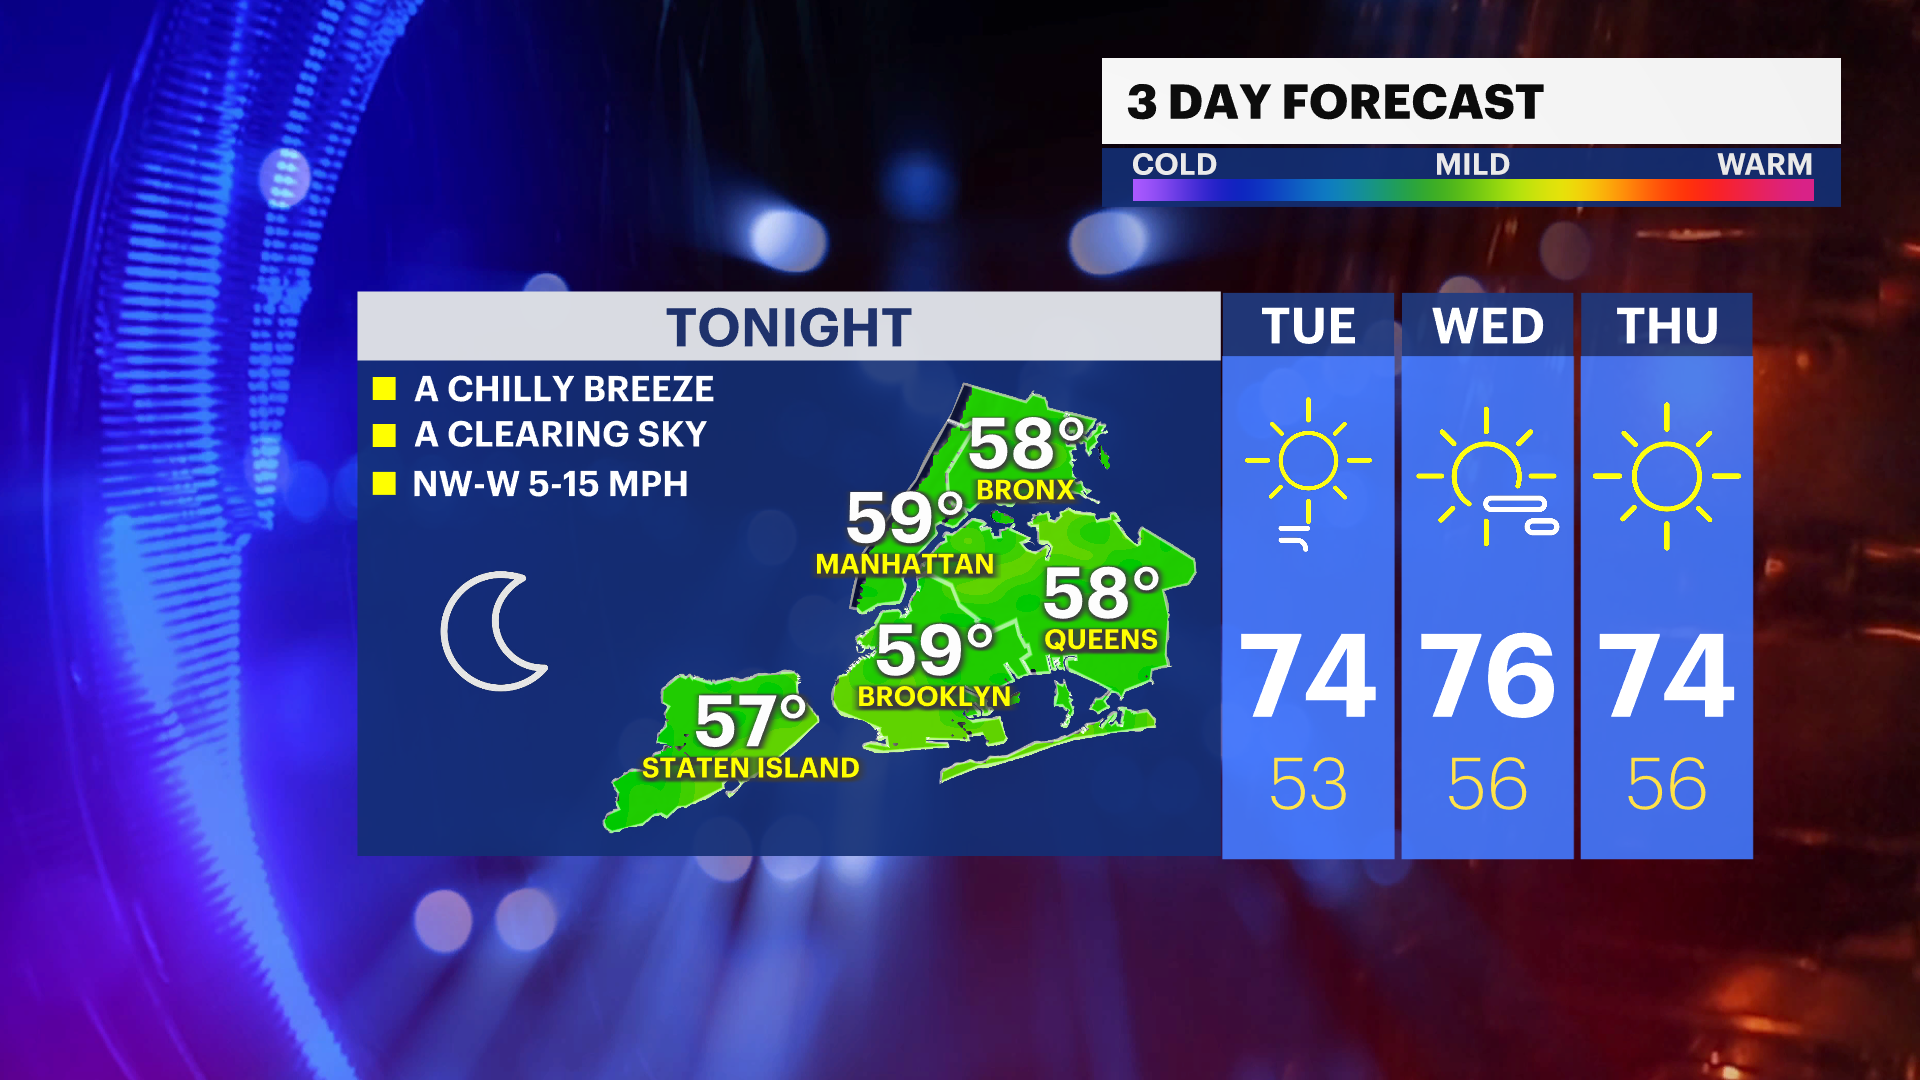 Chilly Weather Tonight Storms Over the Weekend Tuesday PM